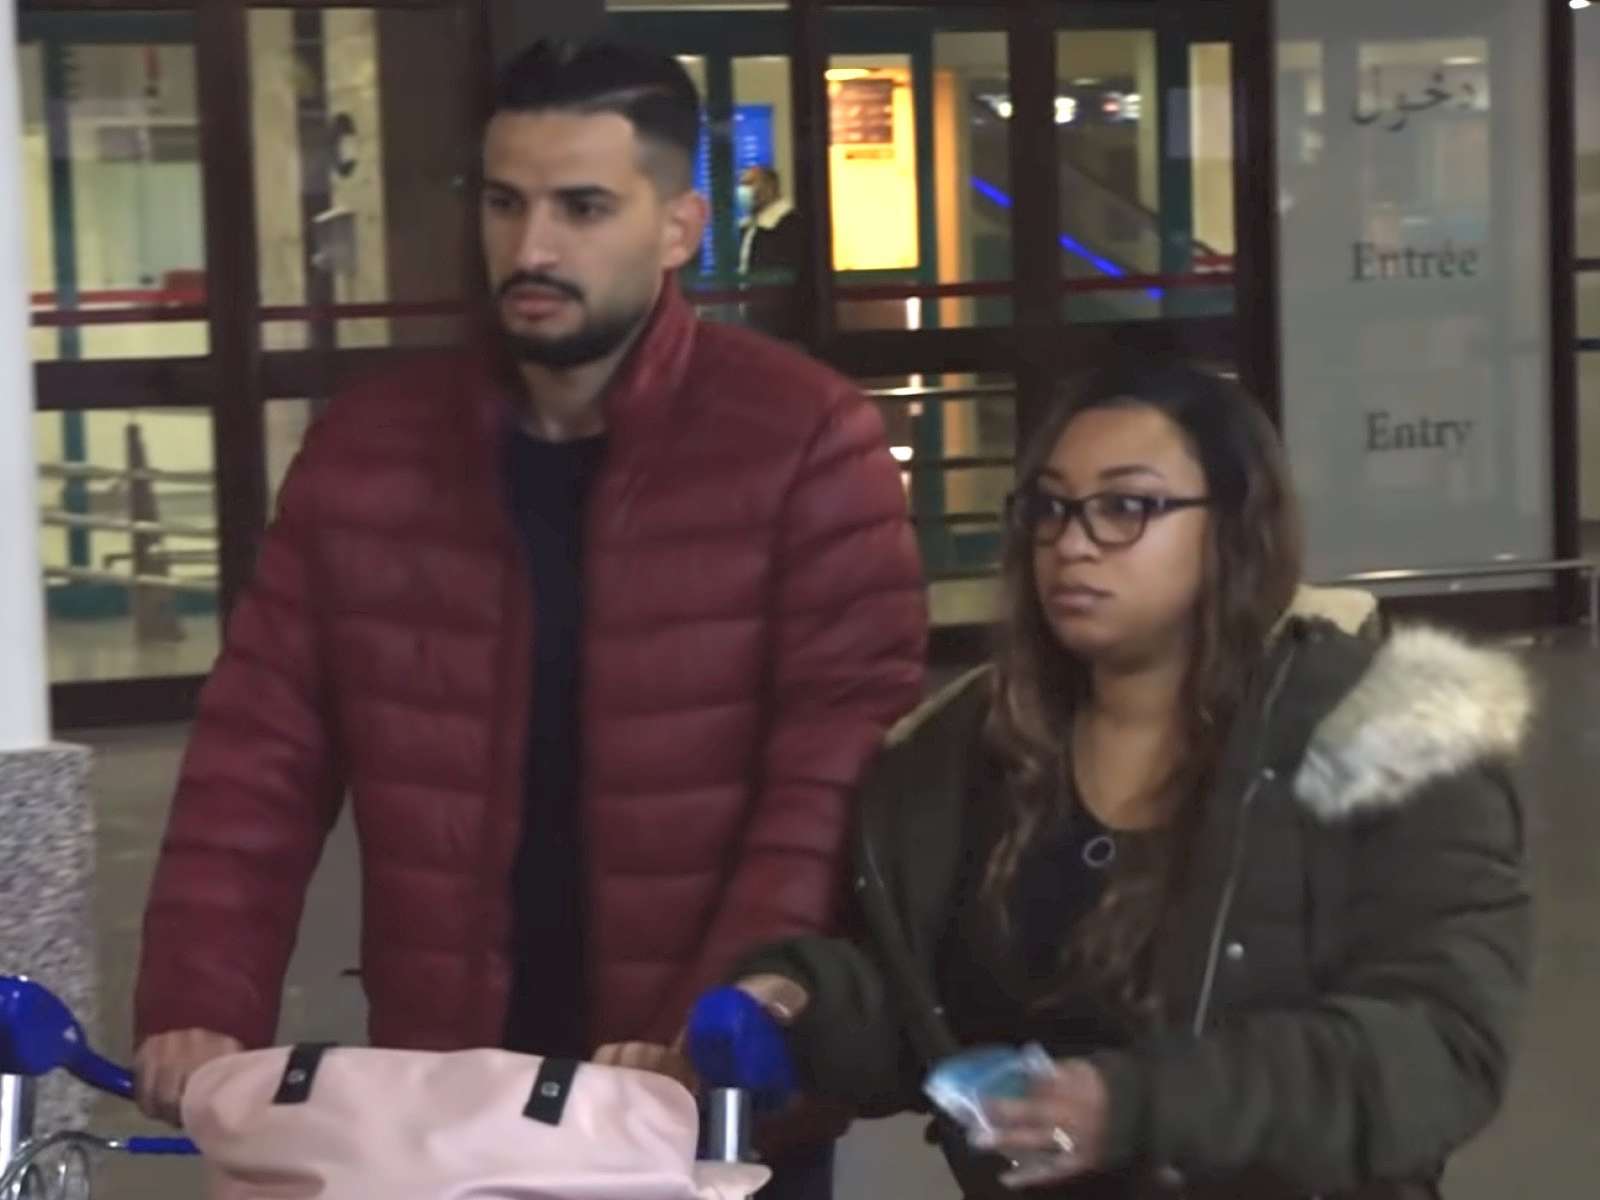 90 Day Fiance spoilers Are Memphis and Hamza still together and married or has the 90 Day Fiance Before the 90 Days couple split? (SPOILERS) picture